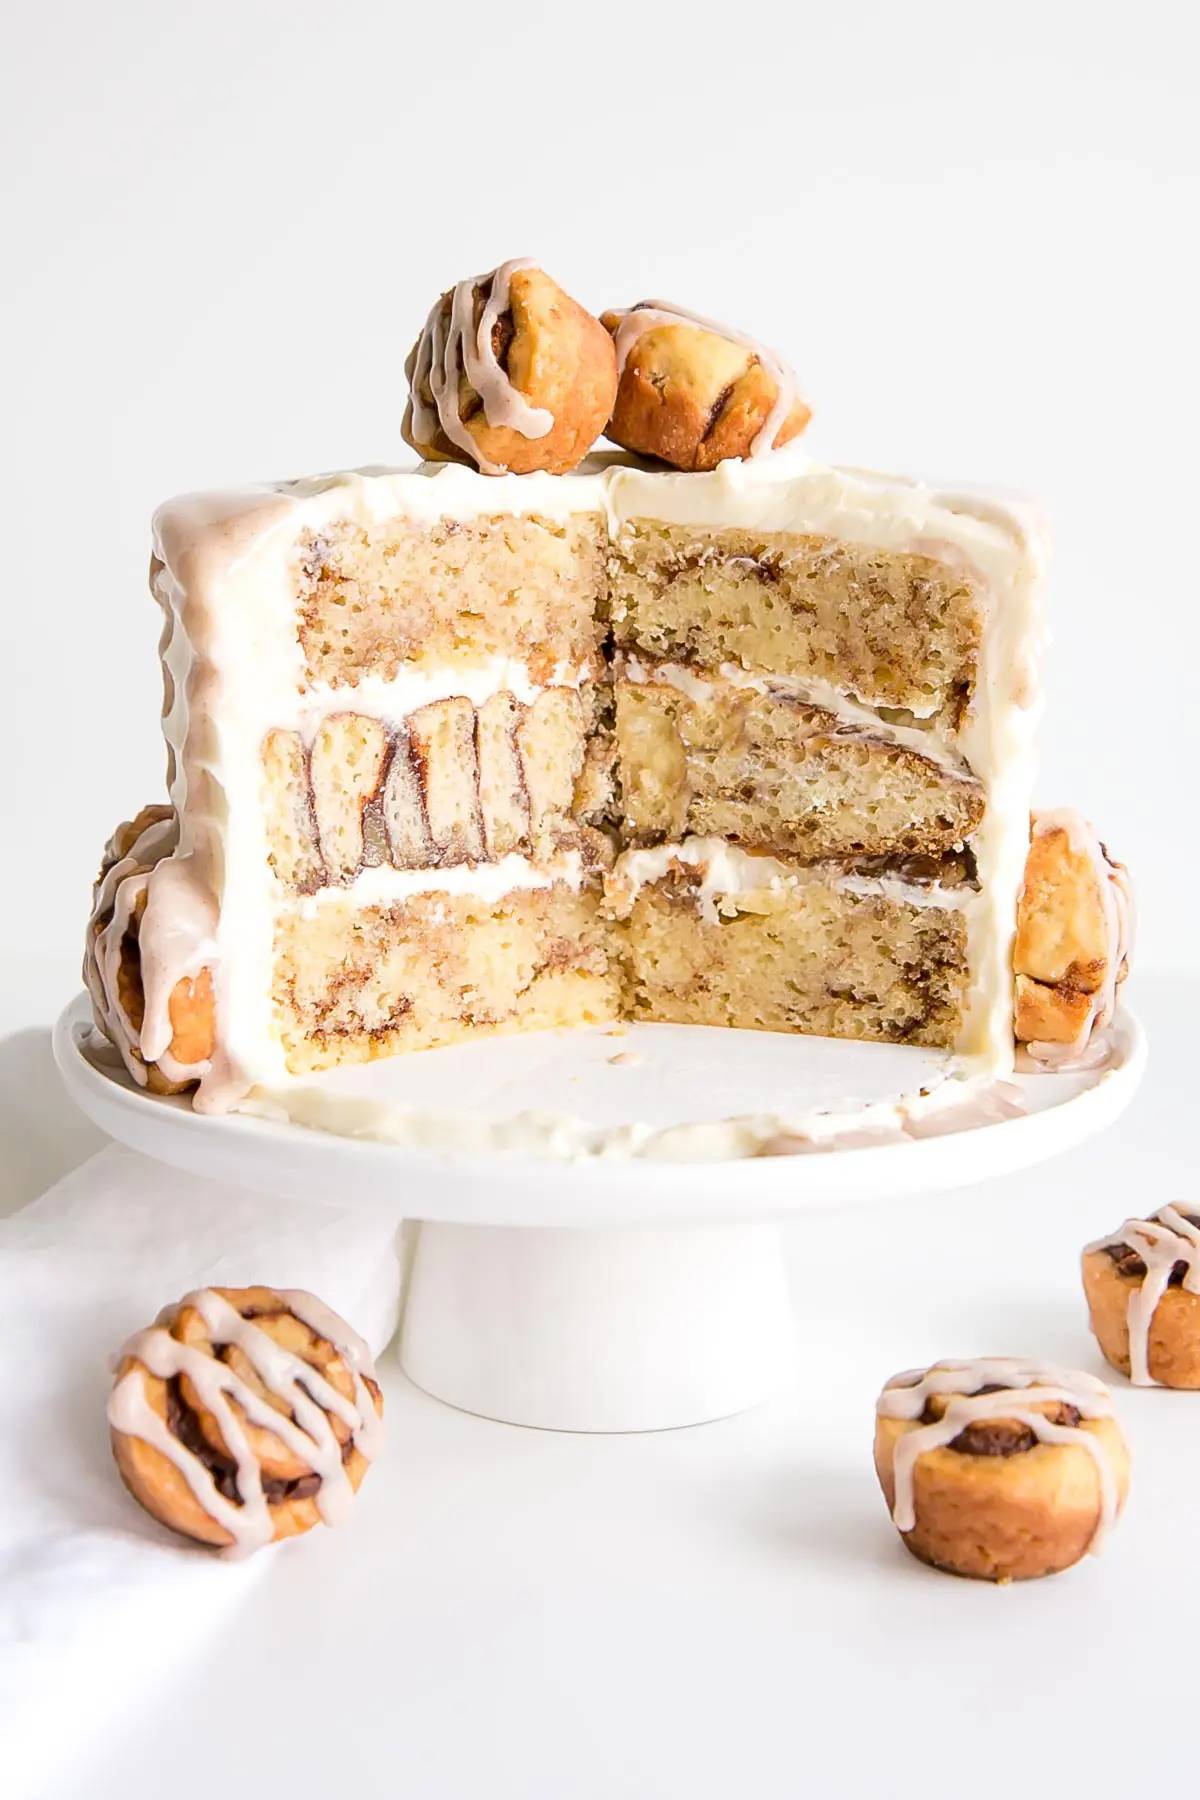 Cross section of cake showing cinnamon bun middle layer.